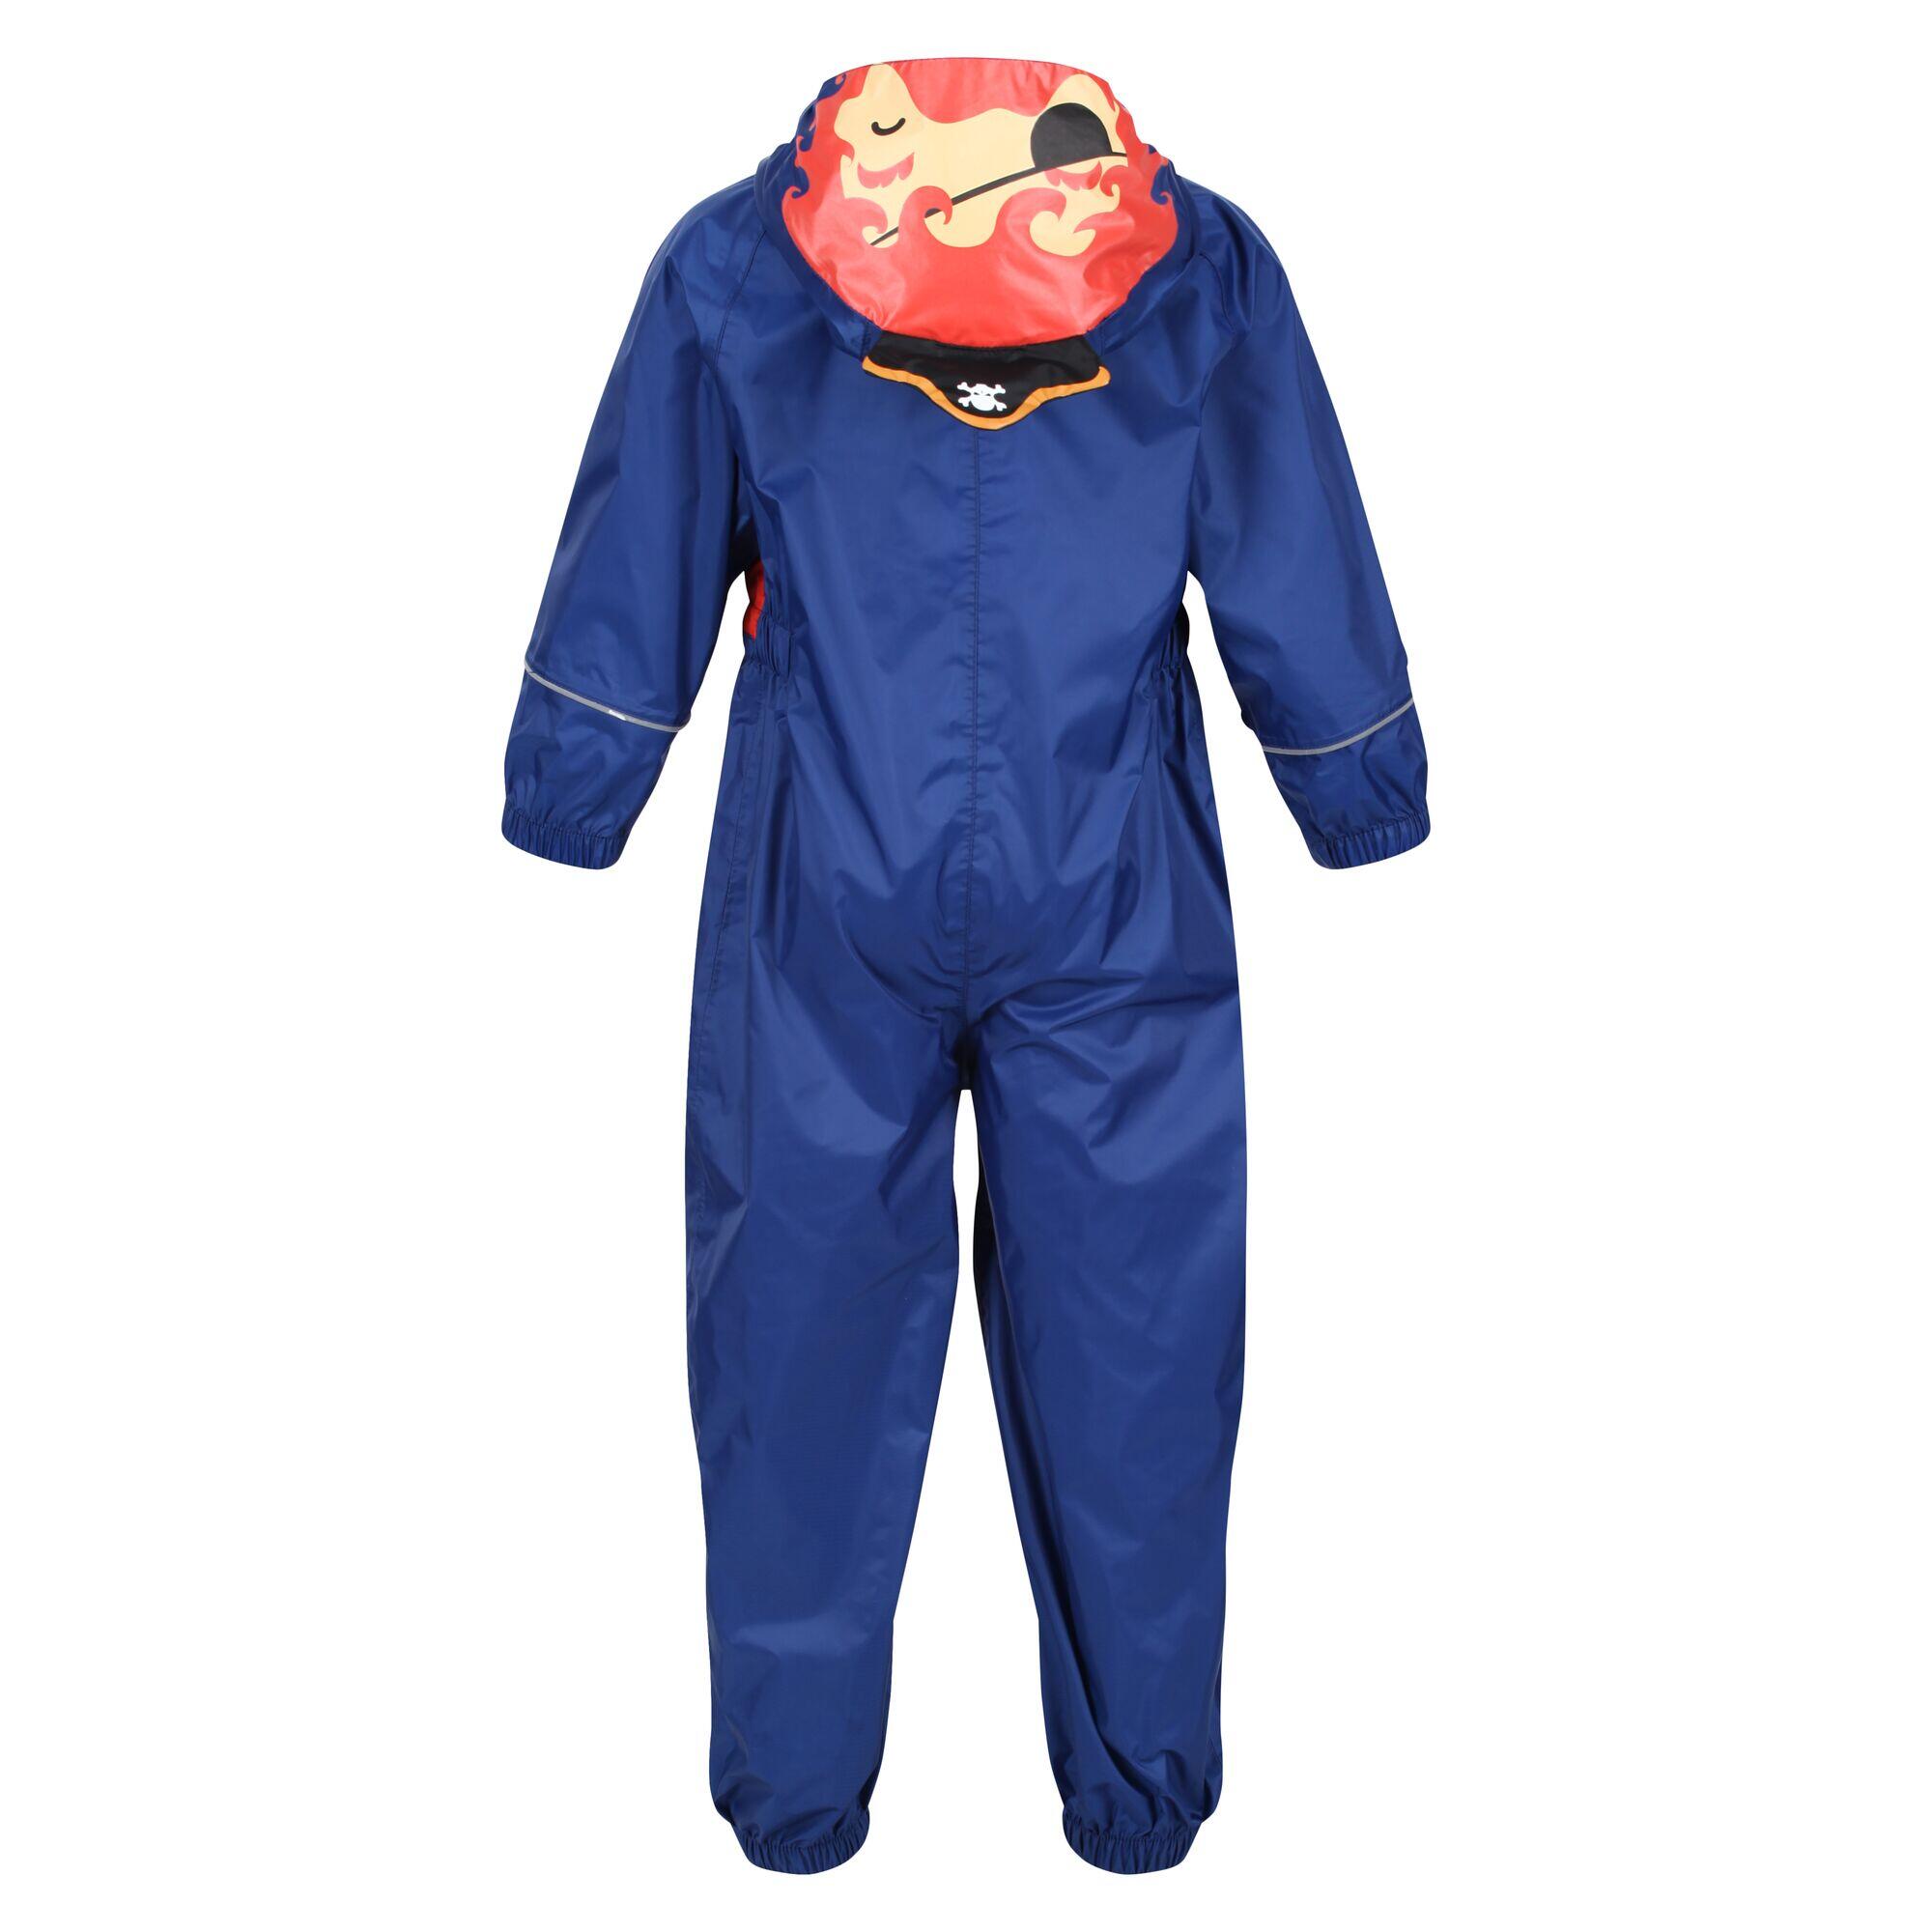 Charco Kids Hiking Hooded Puddle Suit - Blue Pirate 4/4